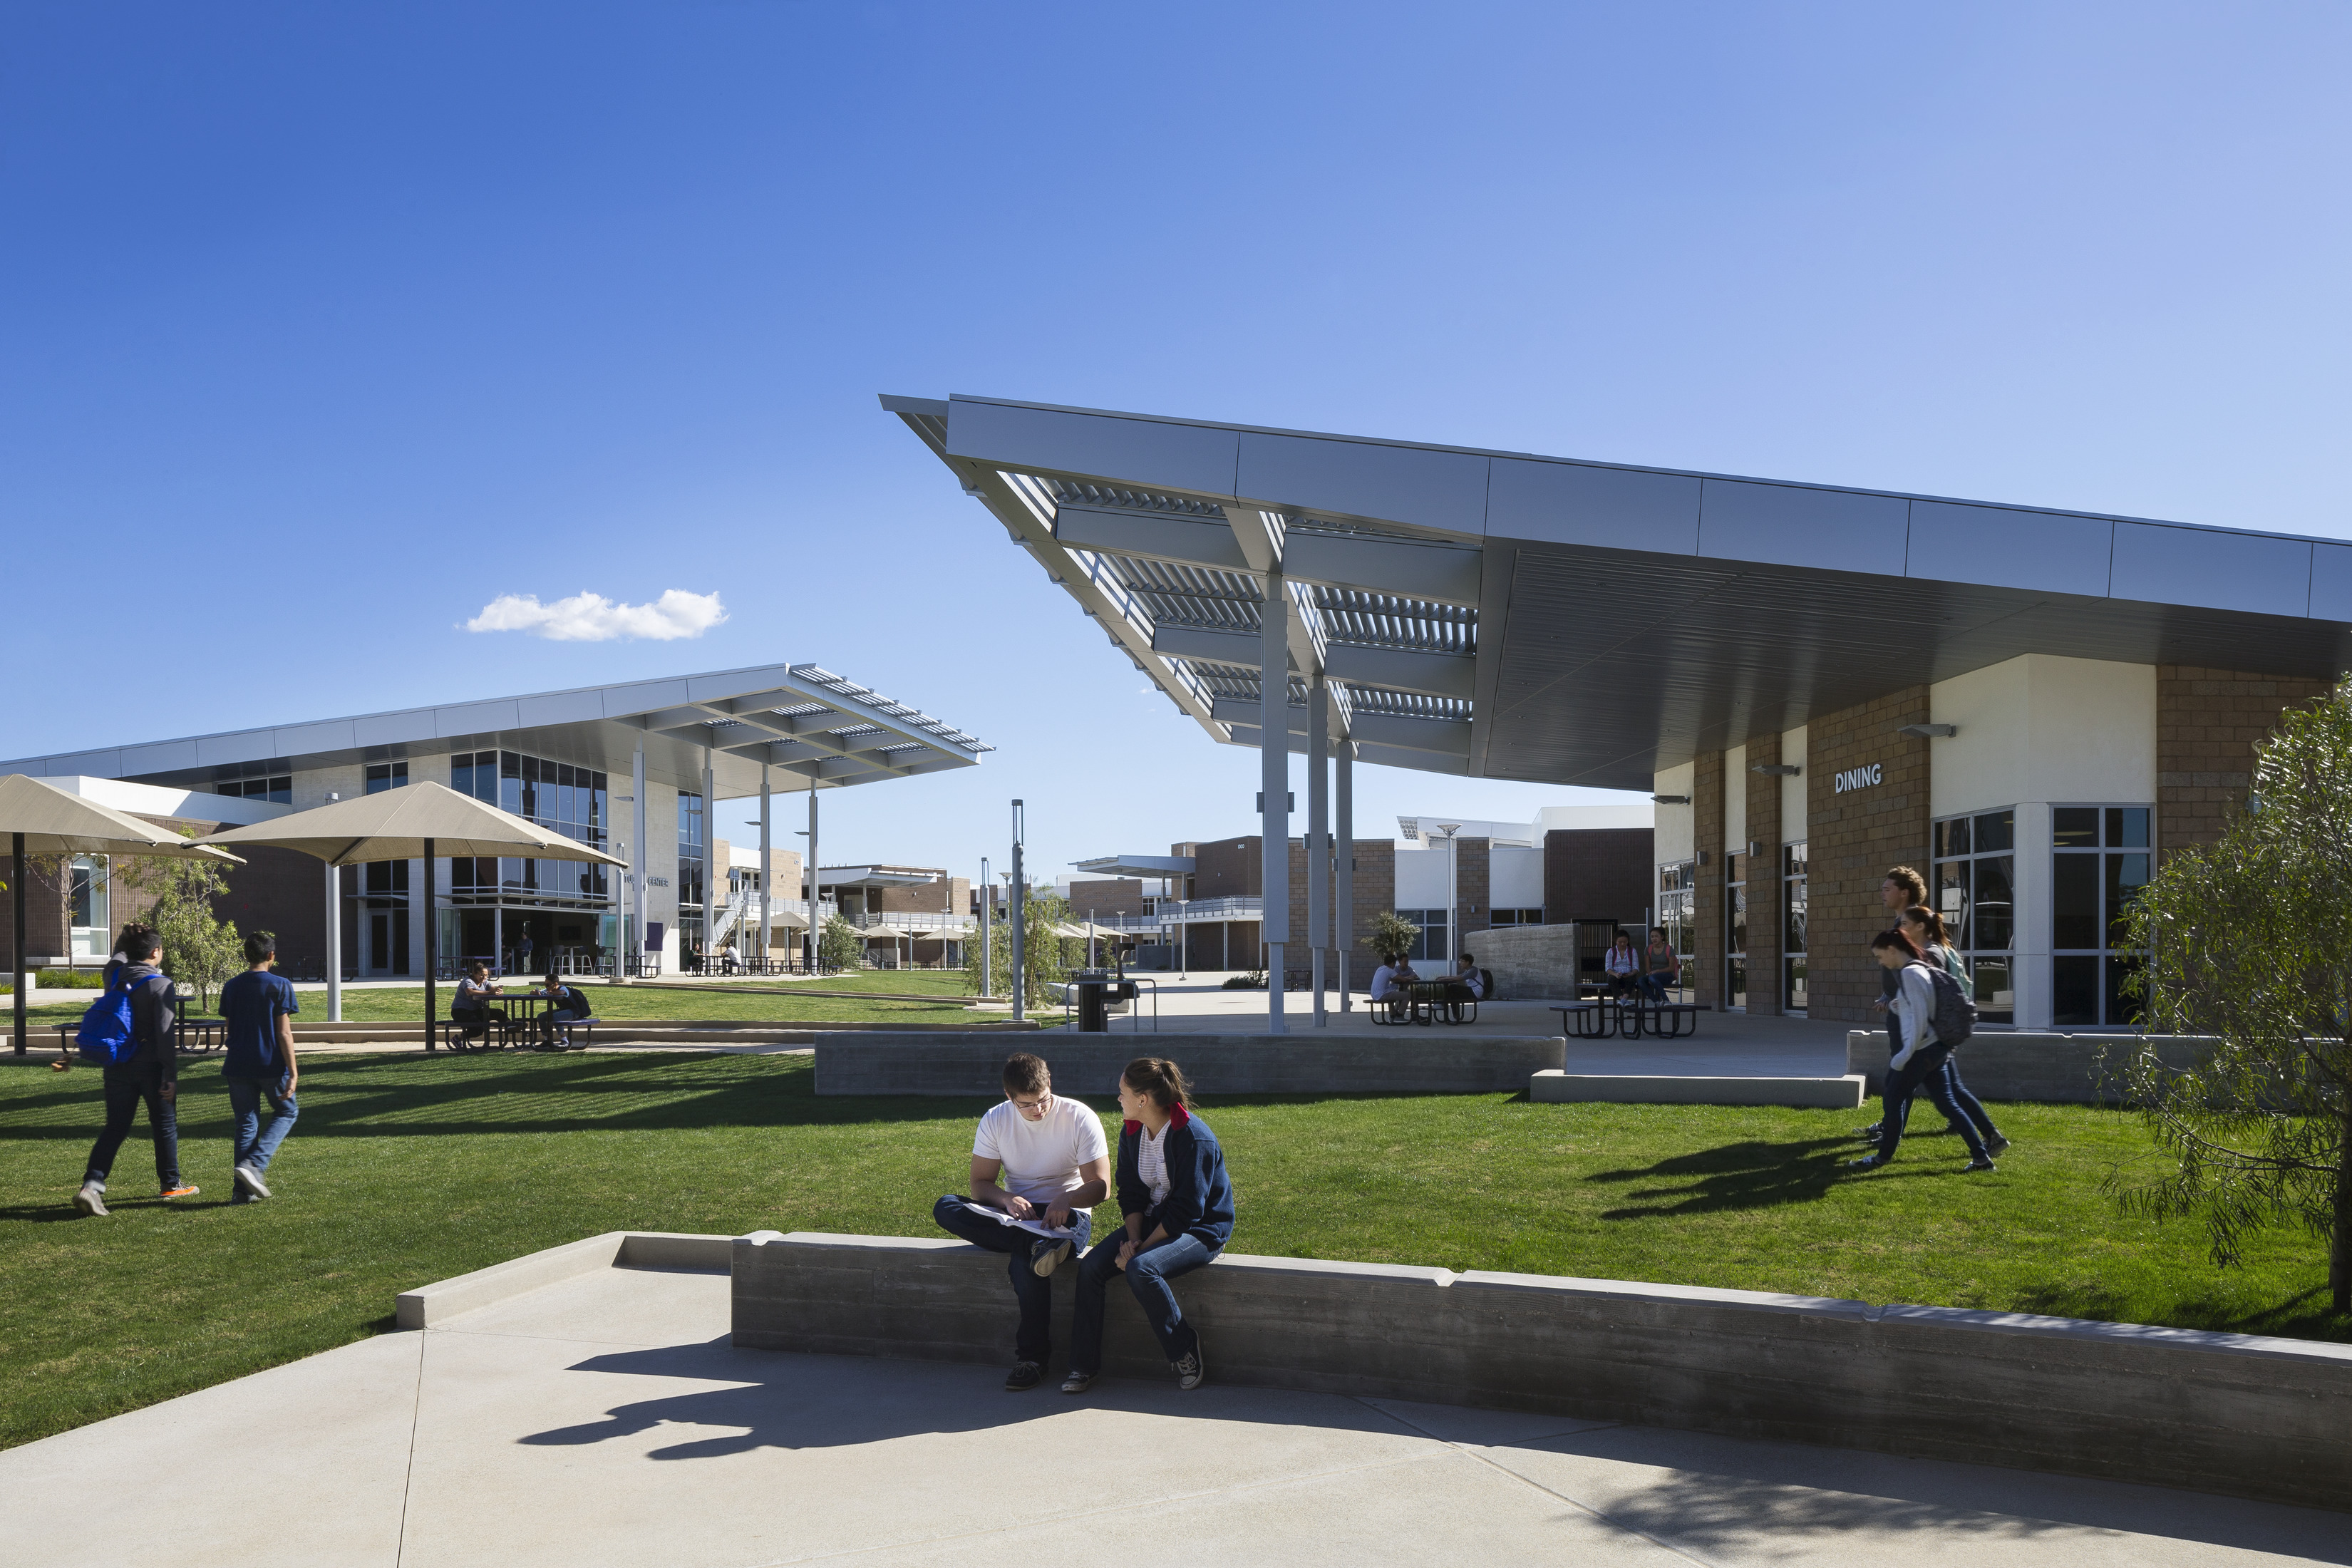  Portola High School applies regenerative architecture principles in their use of space.